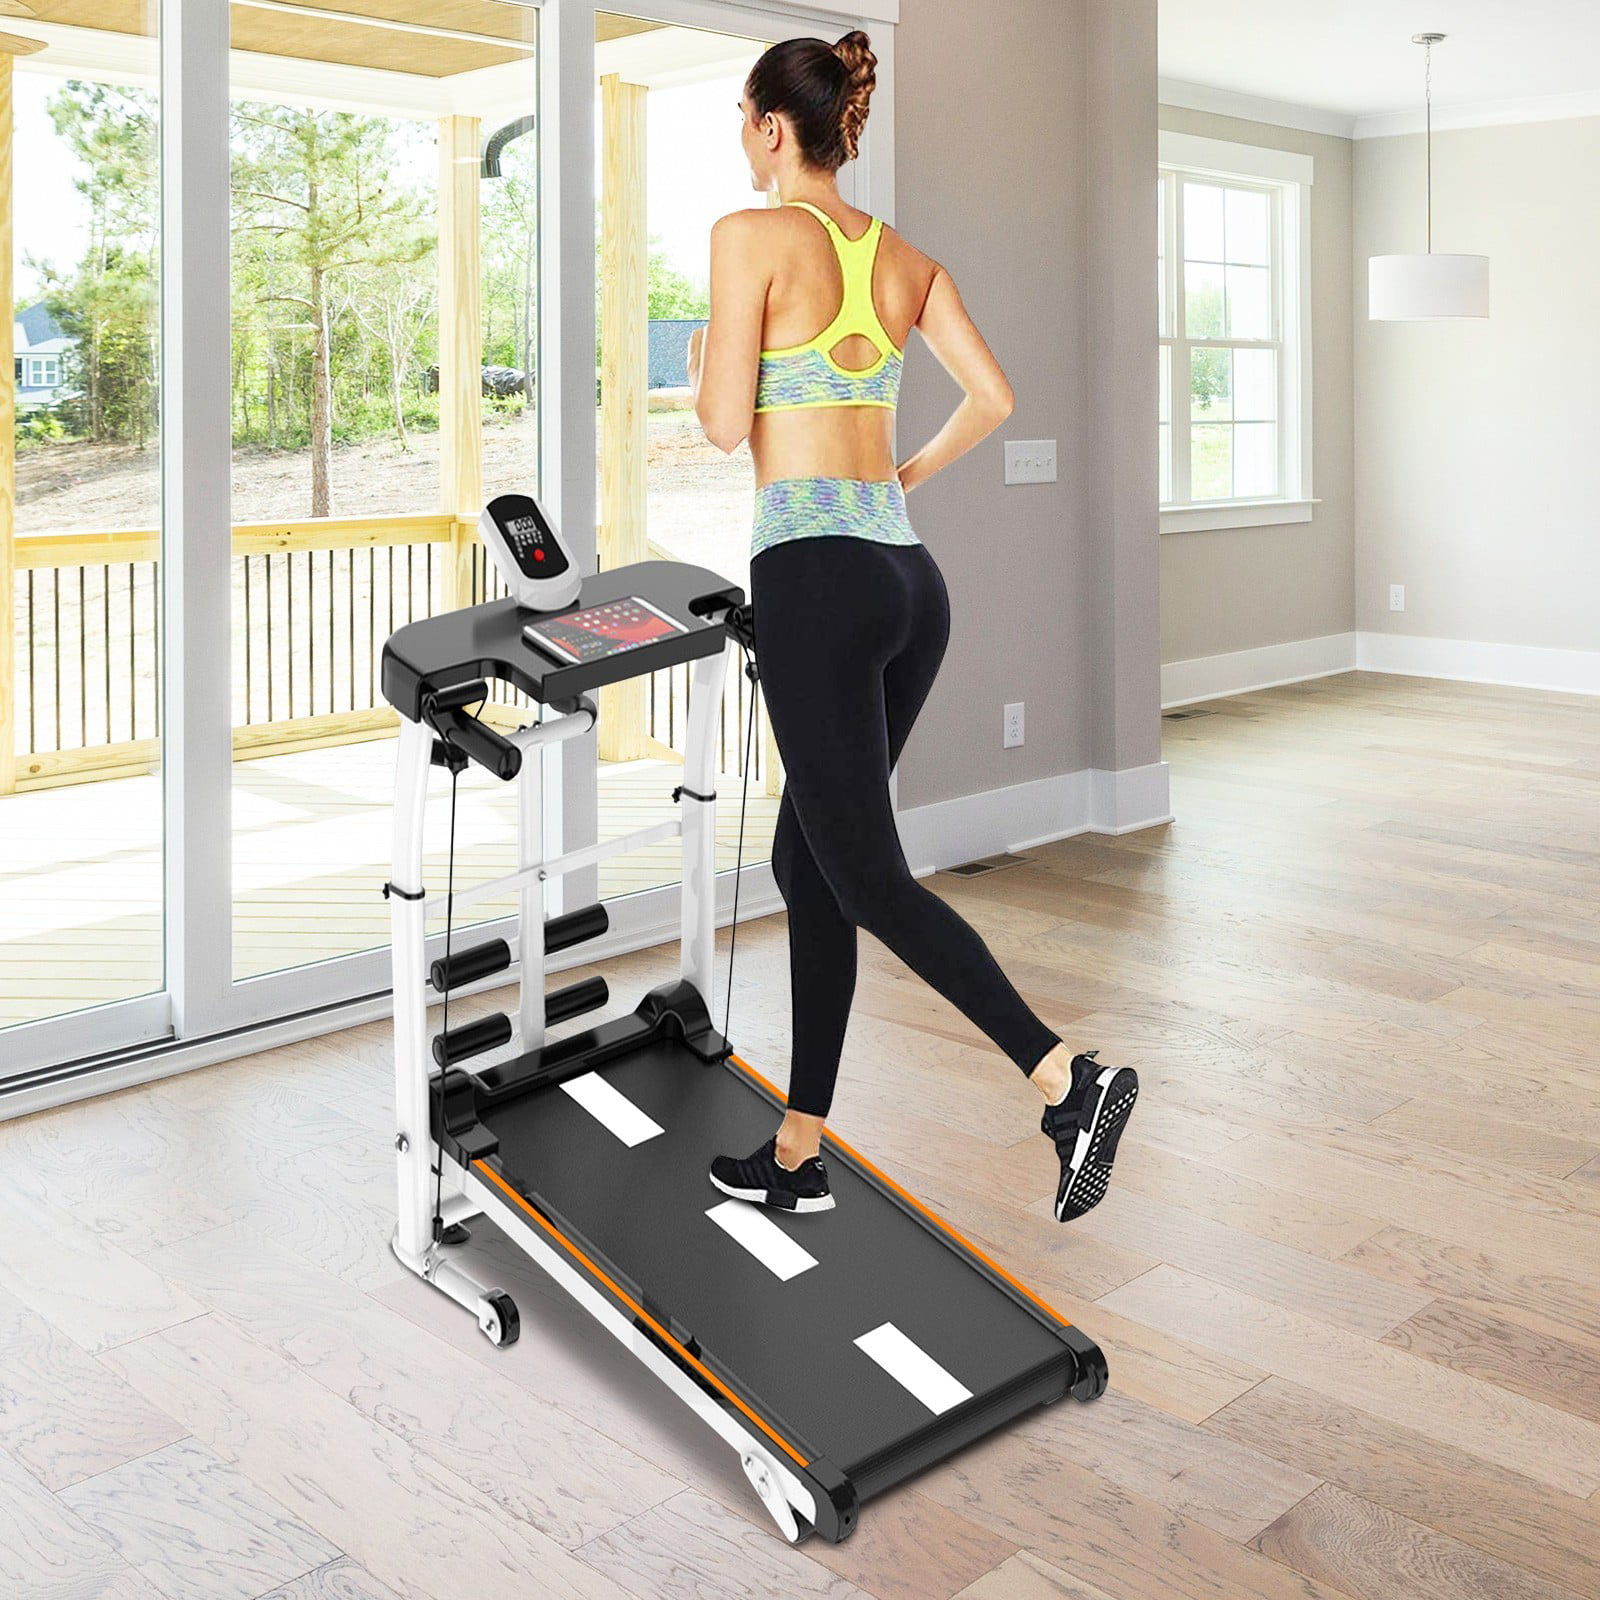 Supine Draw Rope 4-in-1 Mechanical Treadmill T-wisting ❤Folding Shock Running 